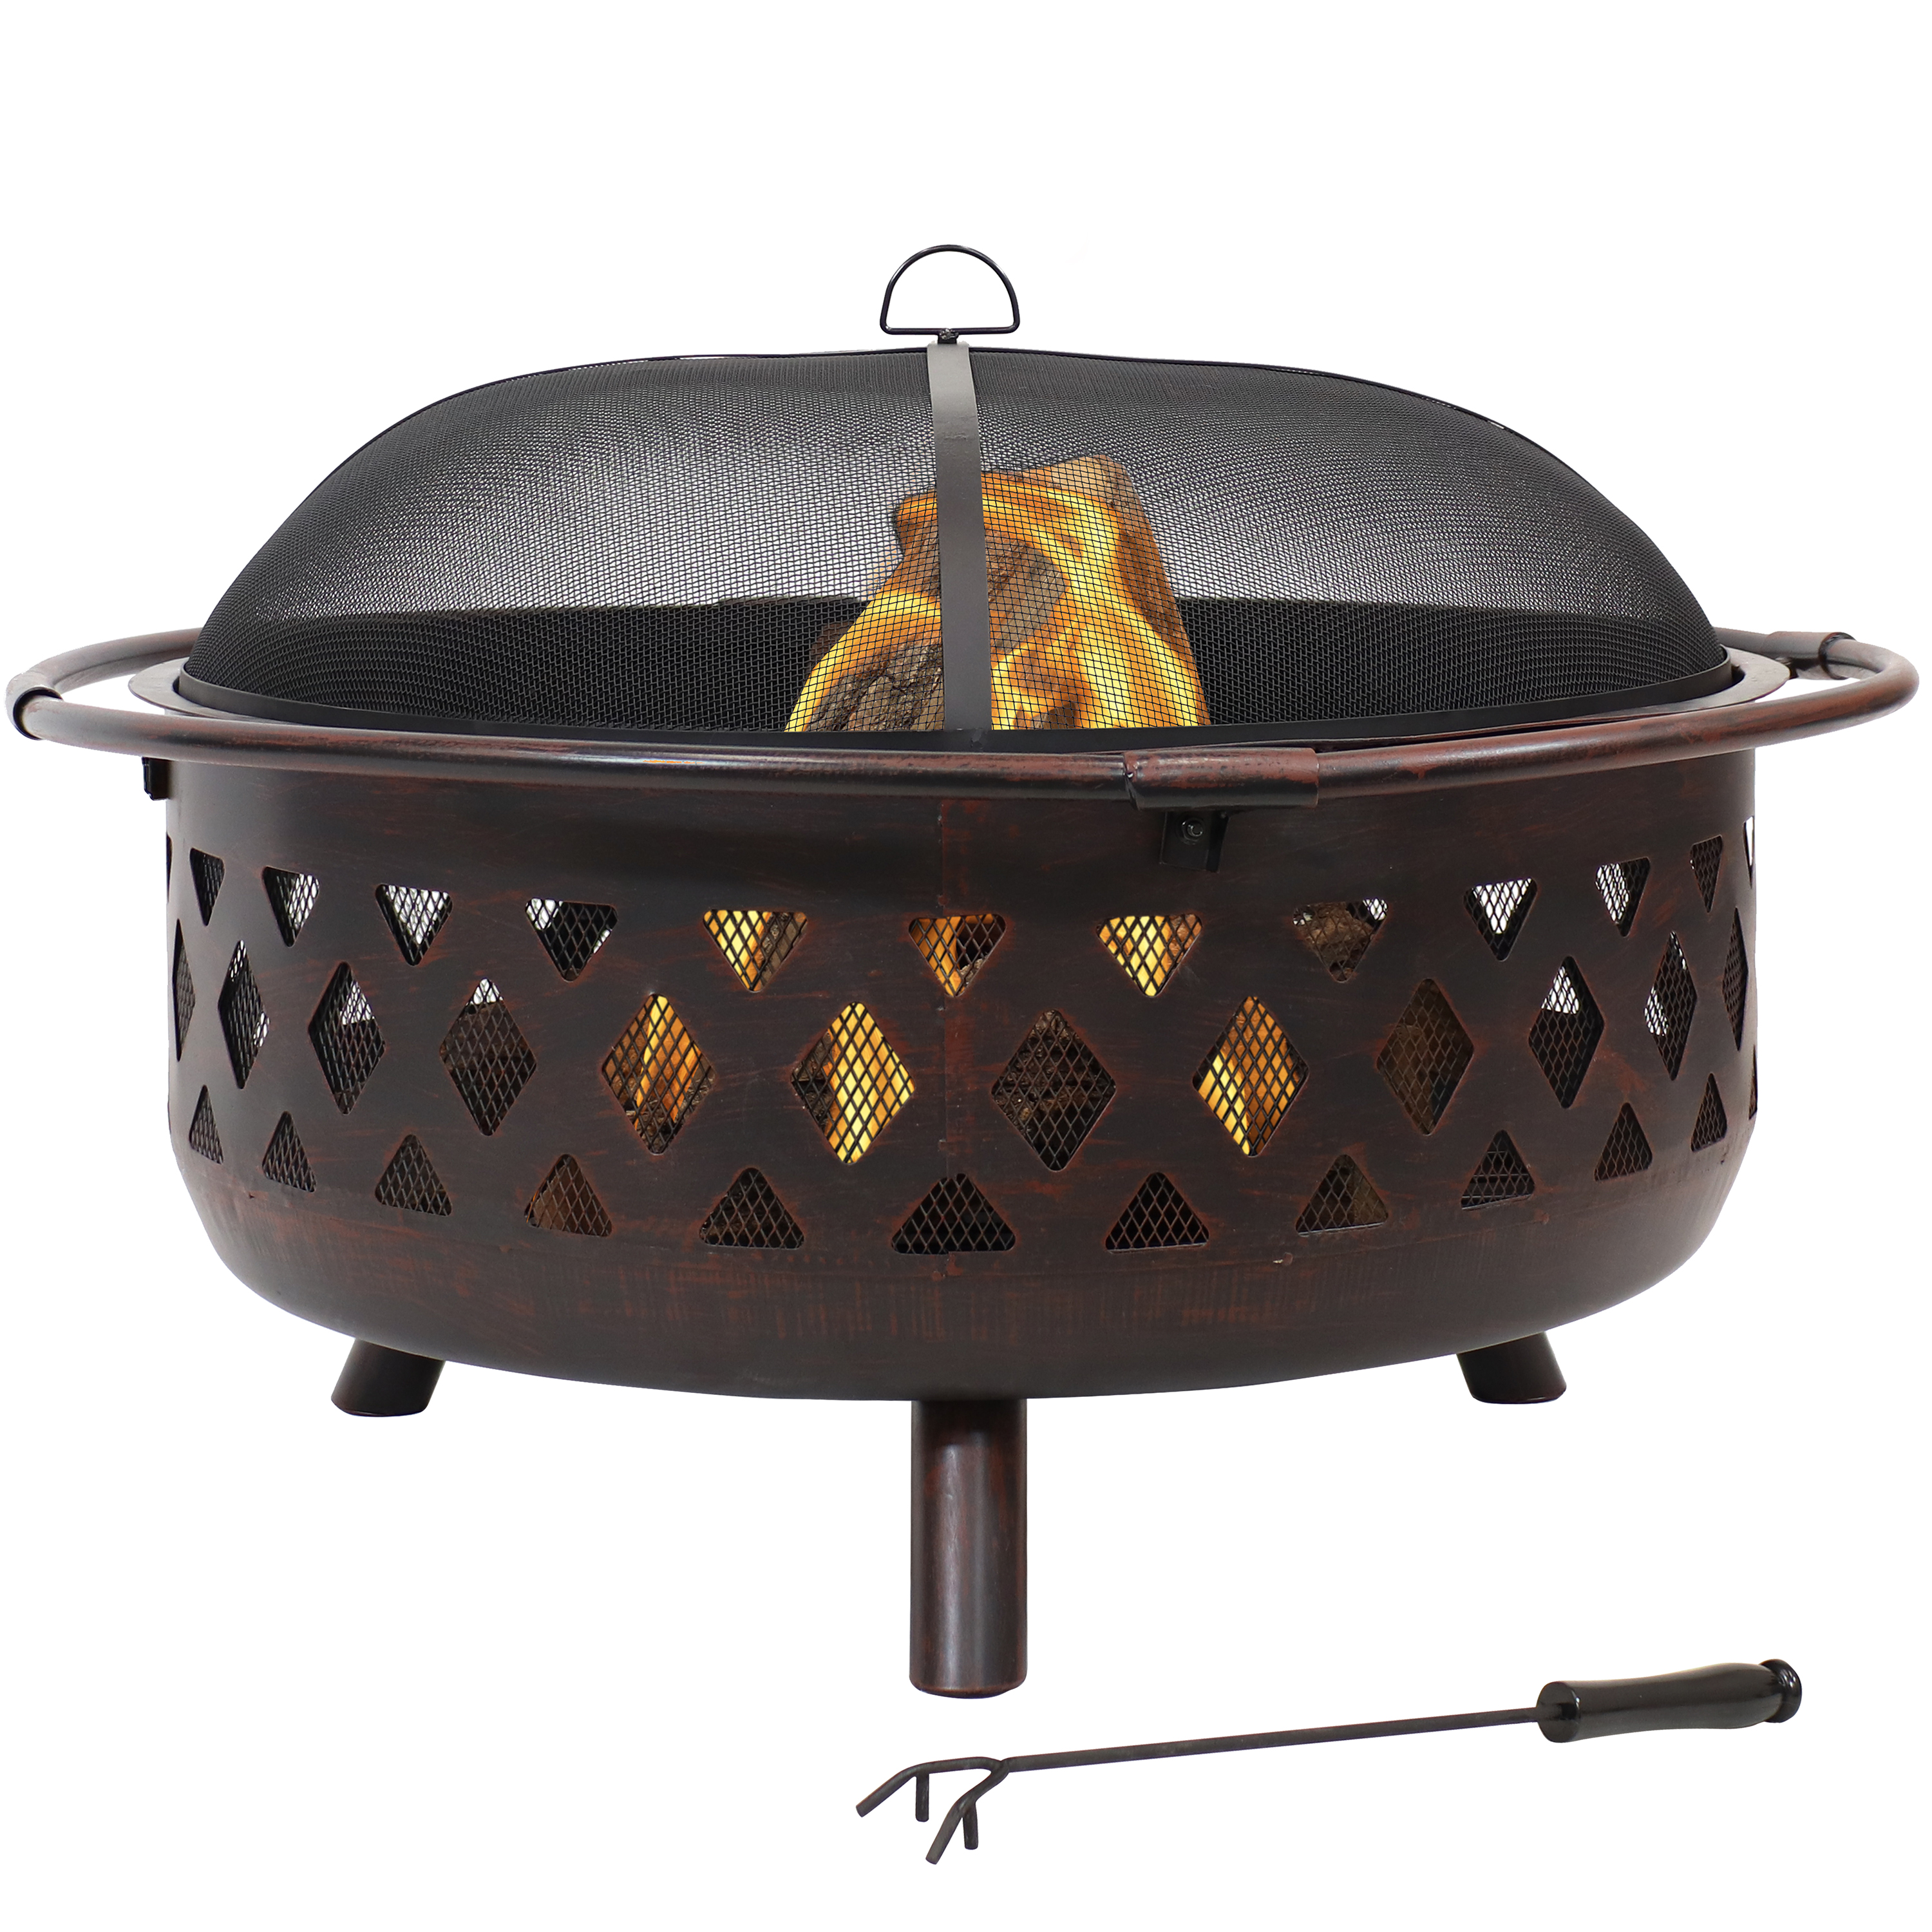 Sunnydaze Bronze Crossweave Wood Burning Fire Pit with Spark Screen - 36-Inch